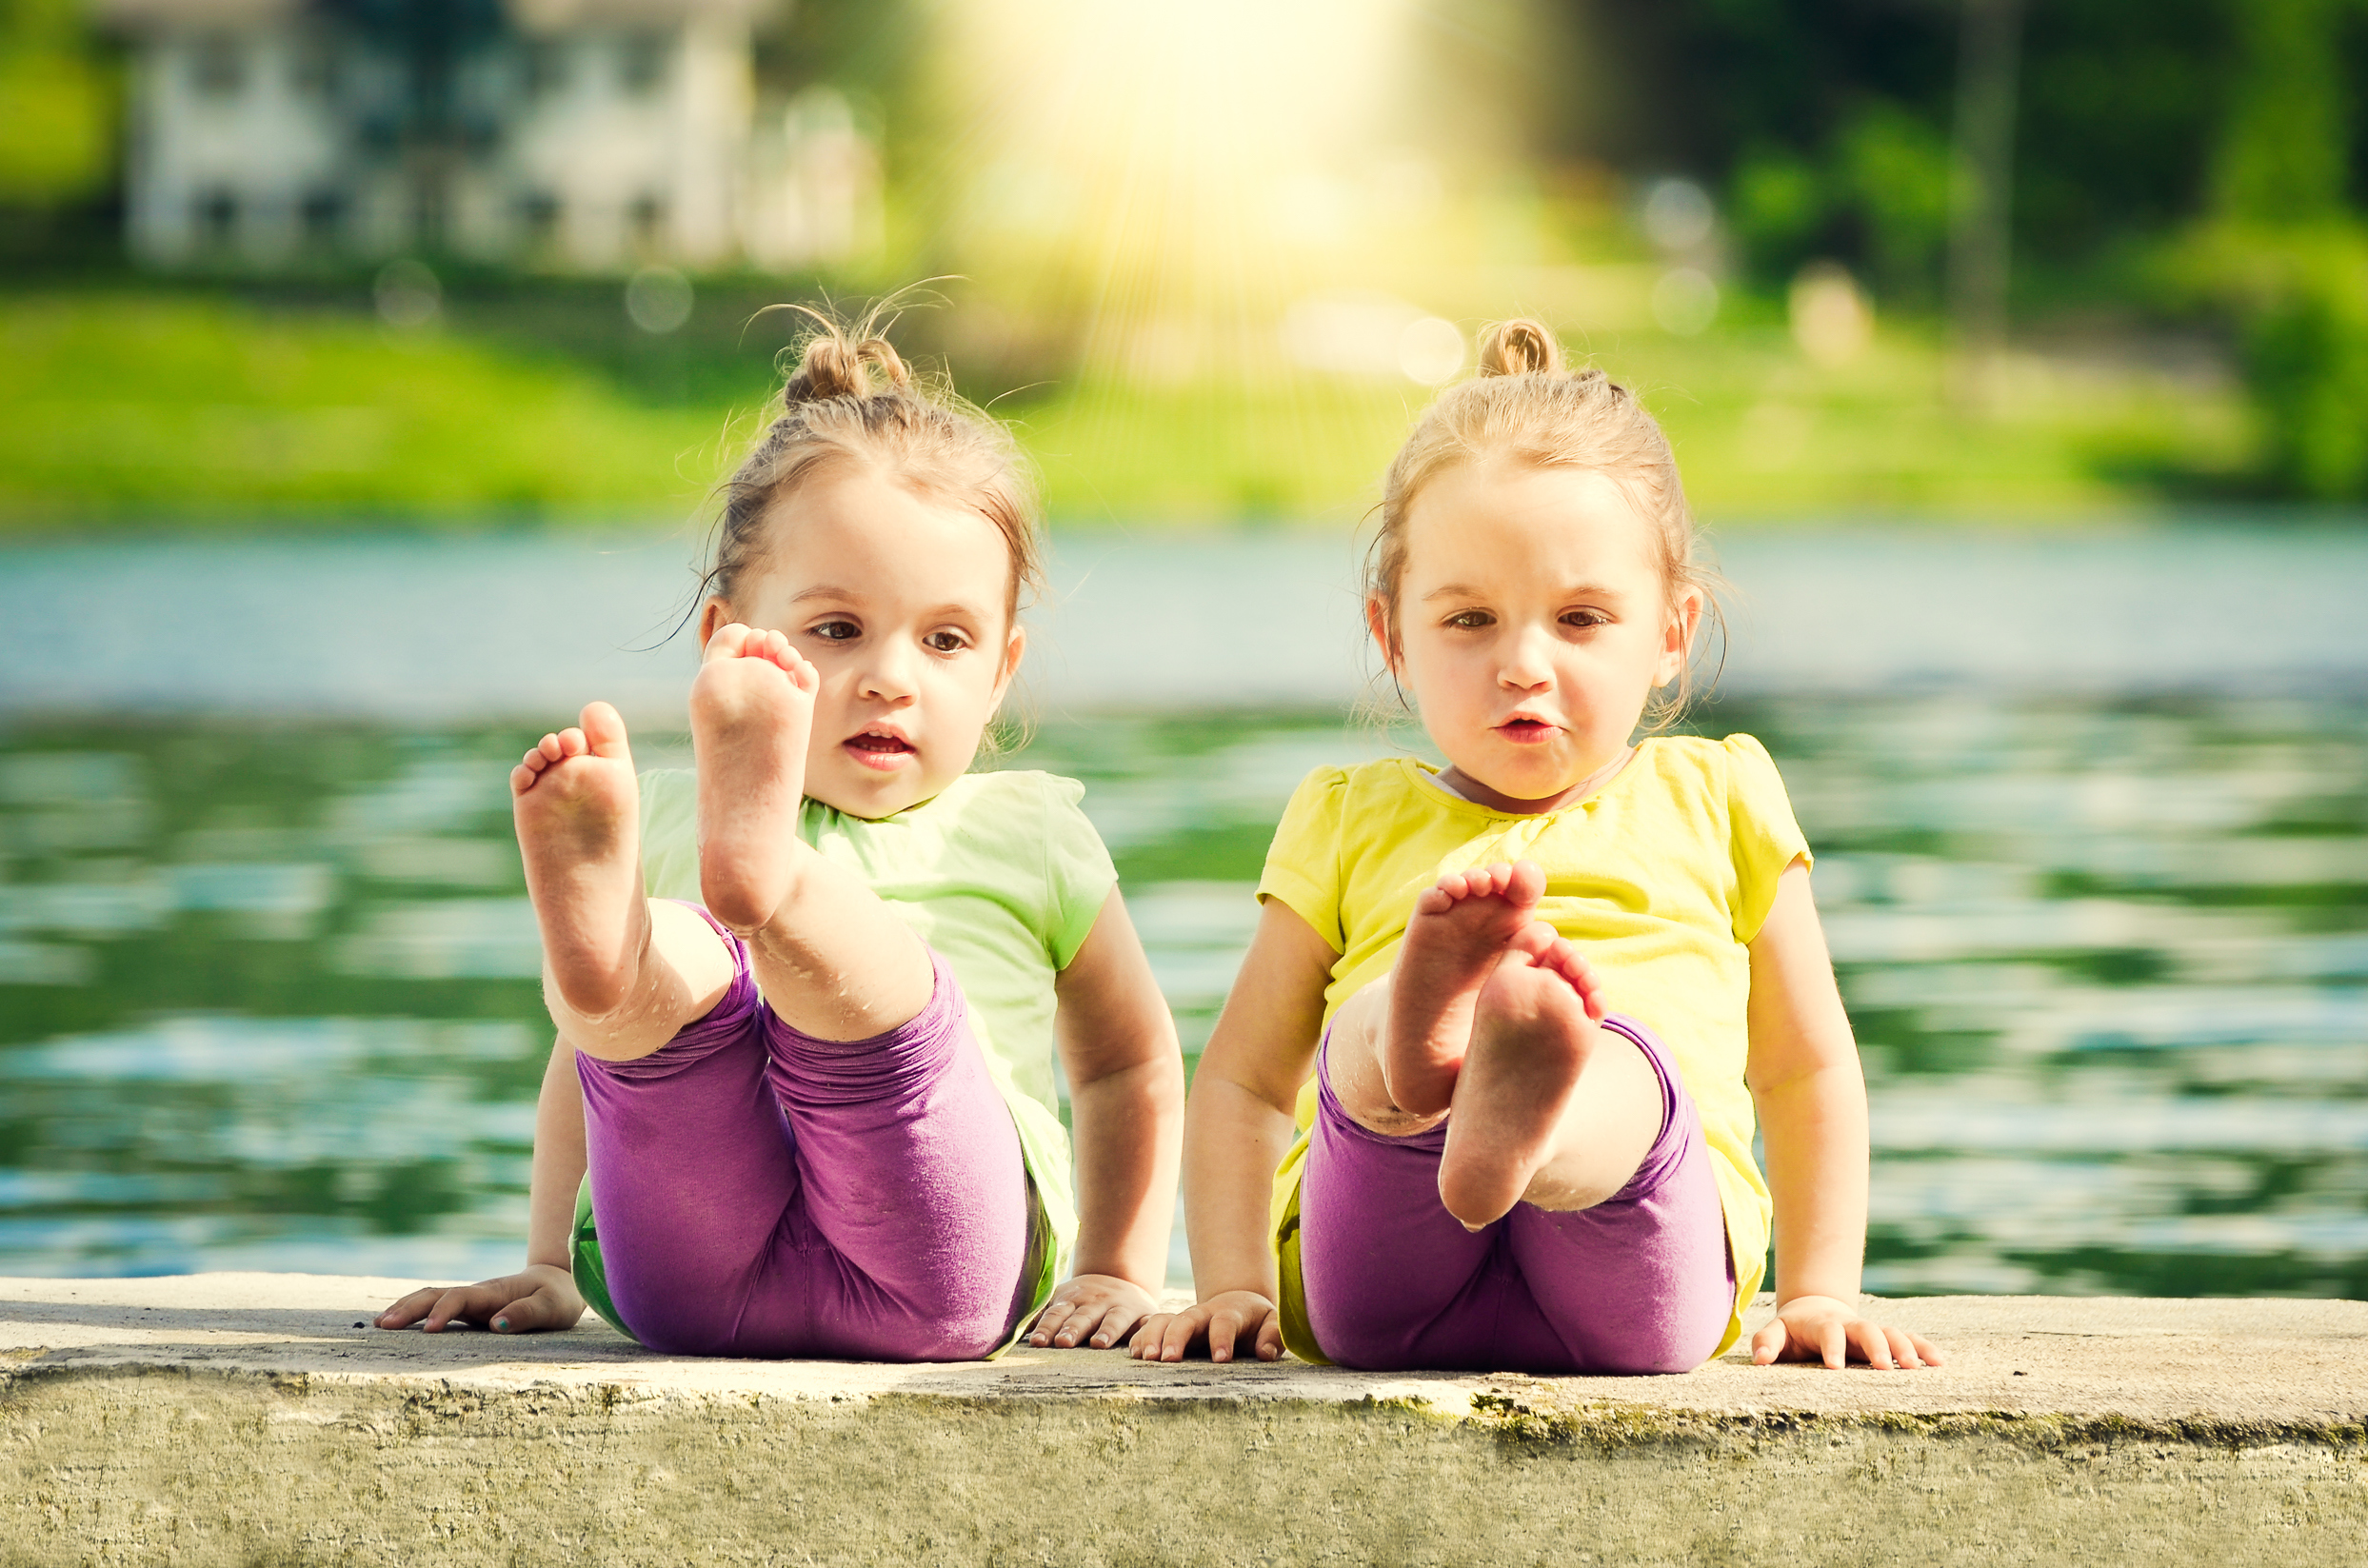 Twin girls in matching outfits holding a pose outdoor